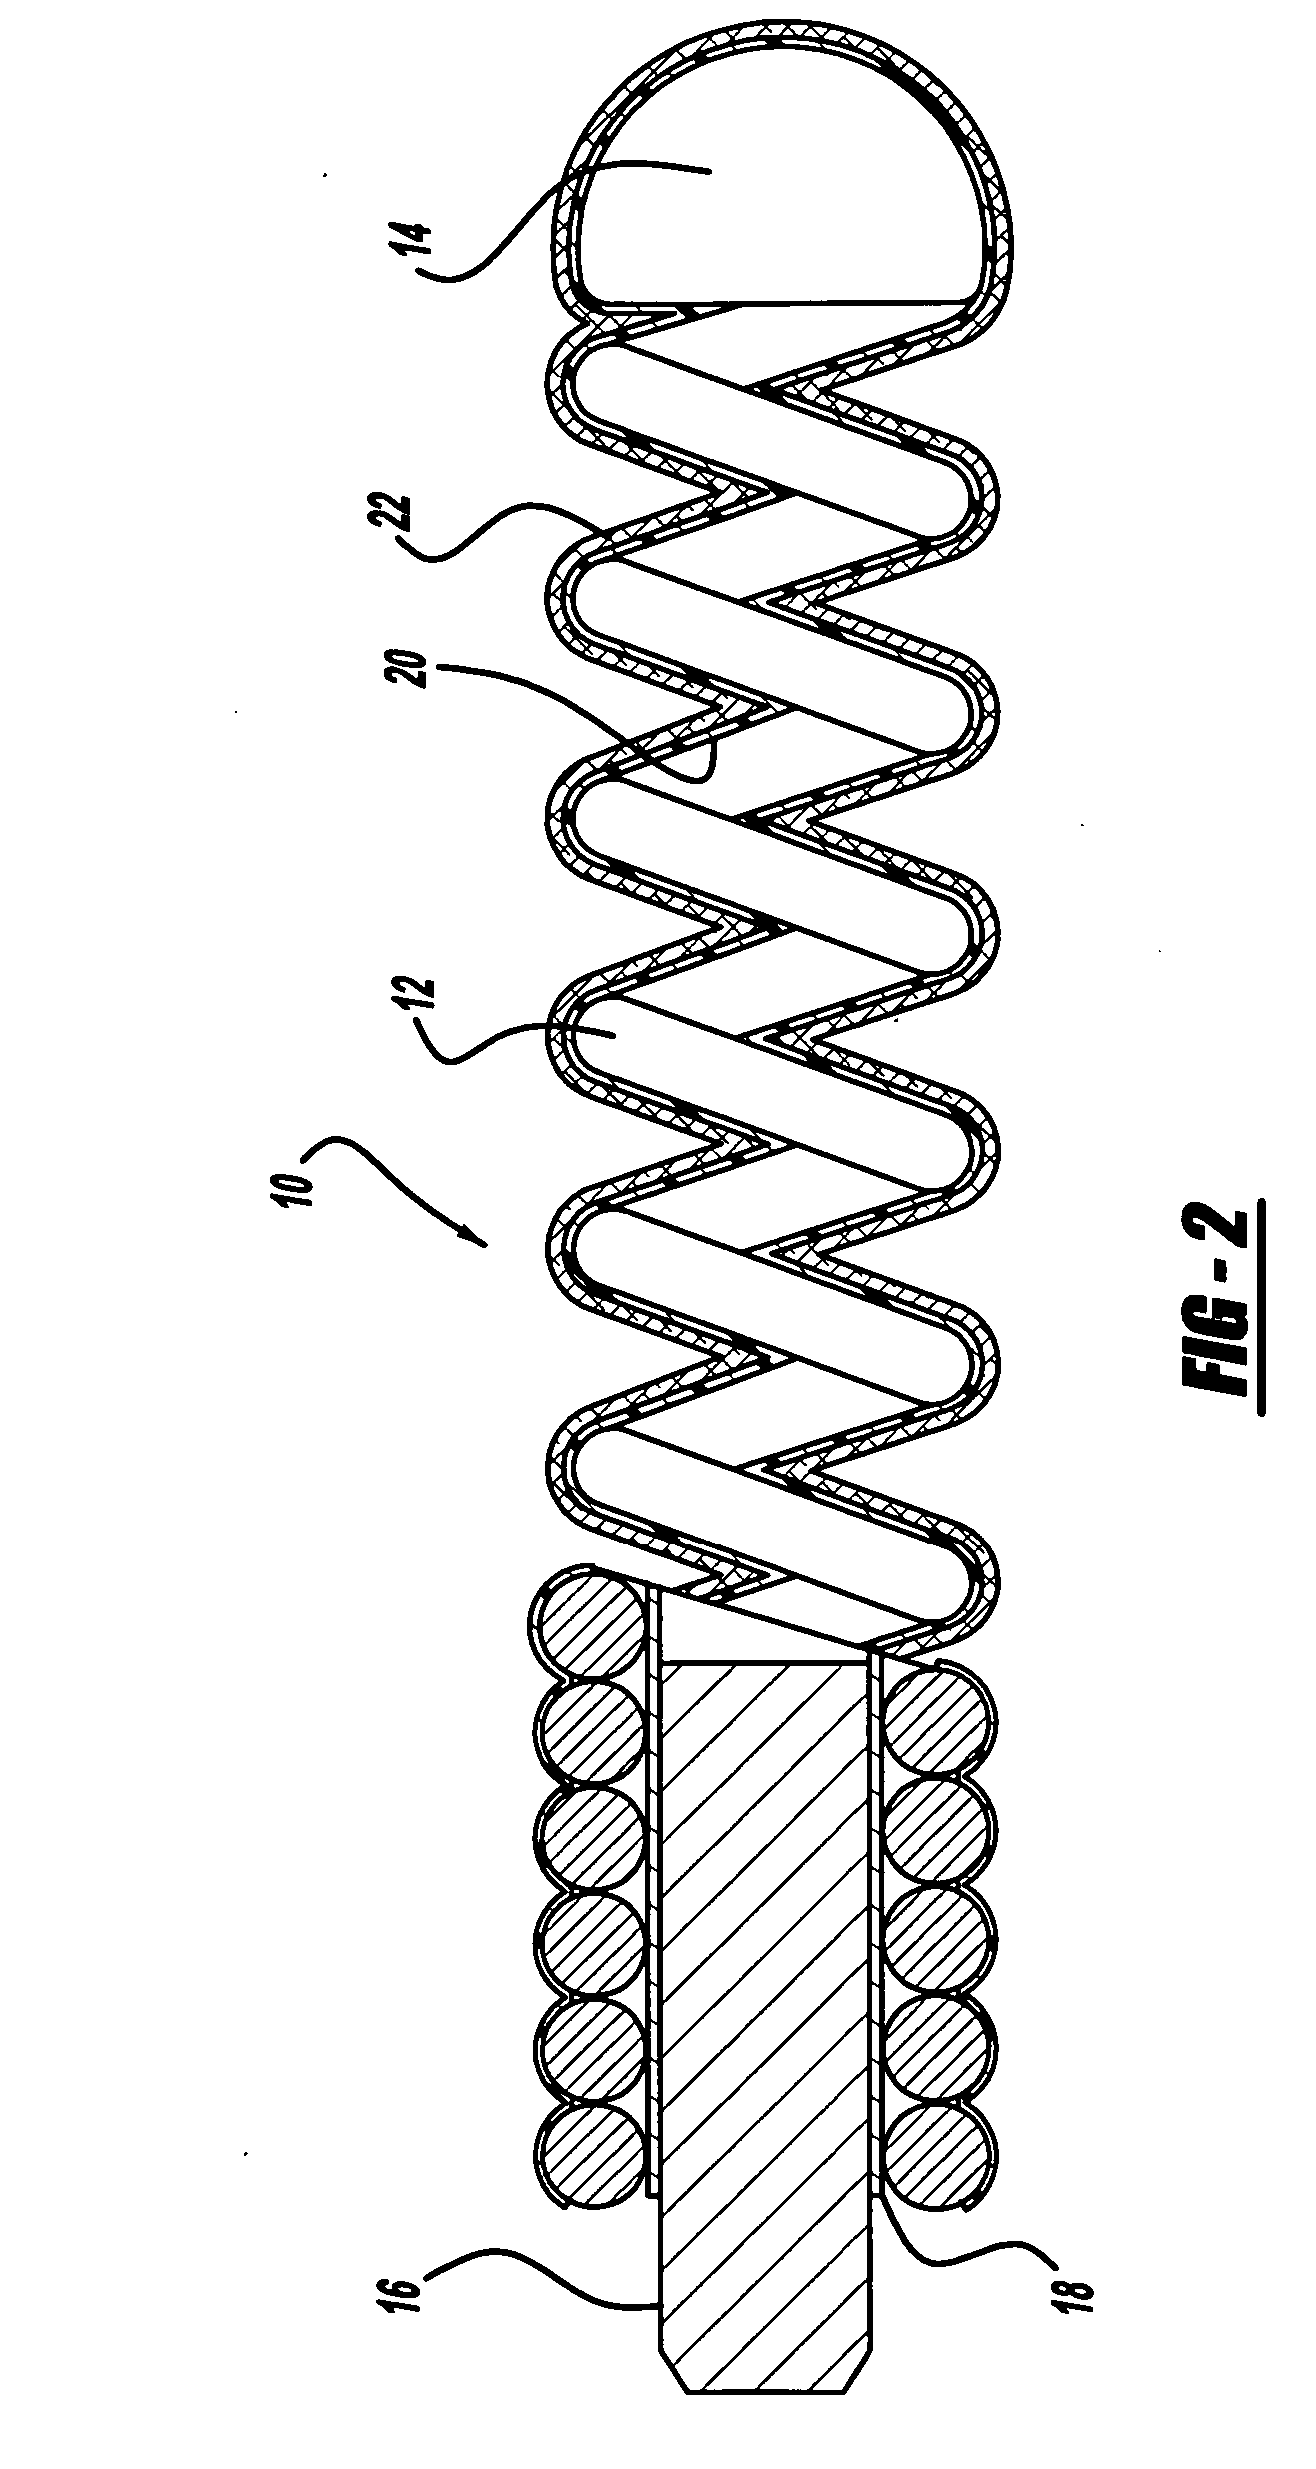 Activatable foam expandable implantable medical device and method of use